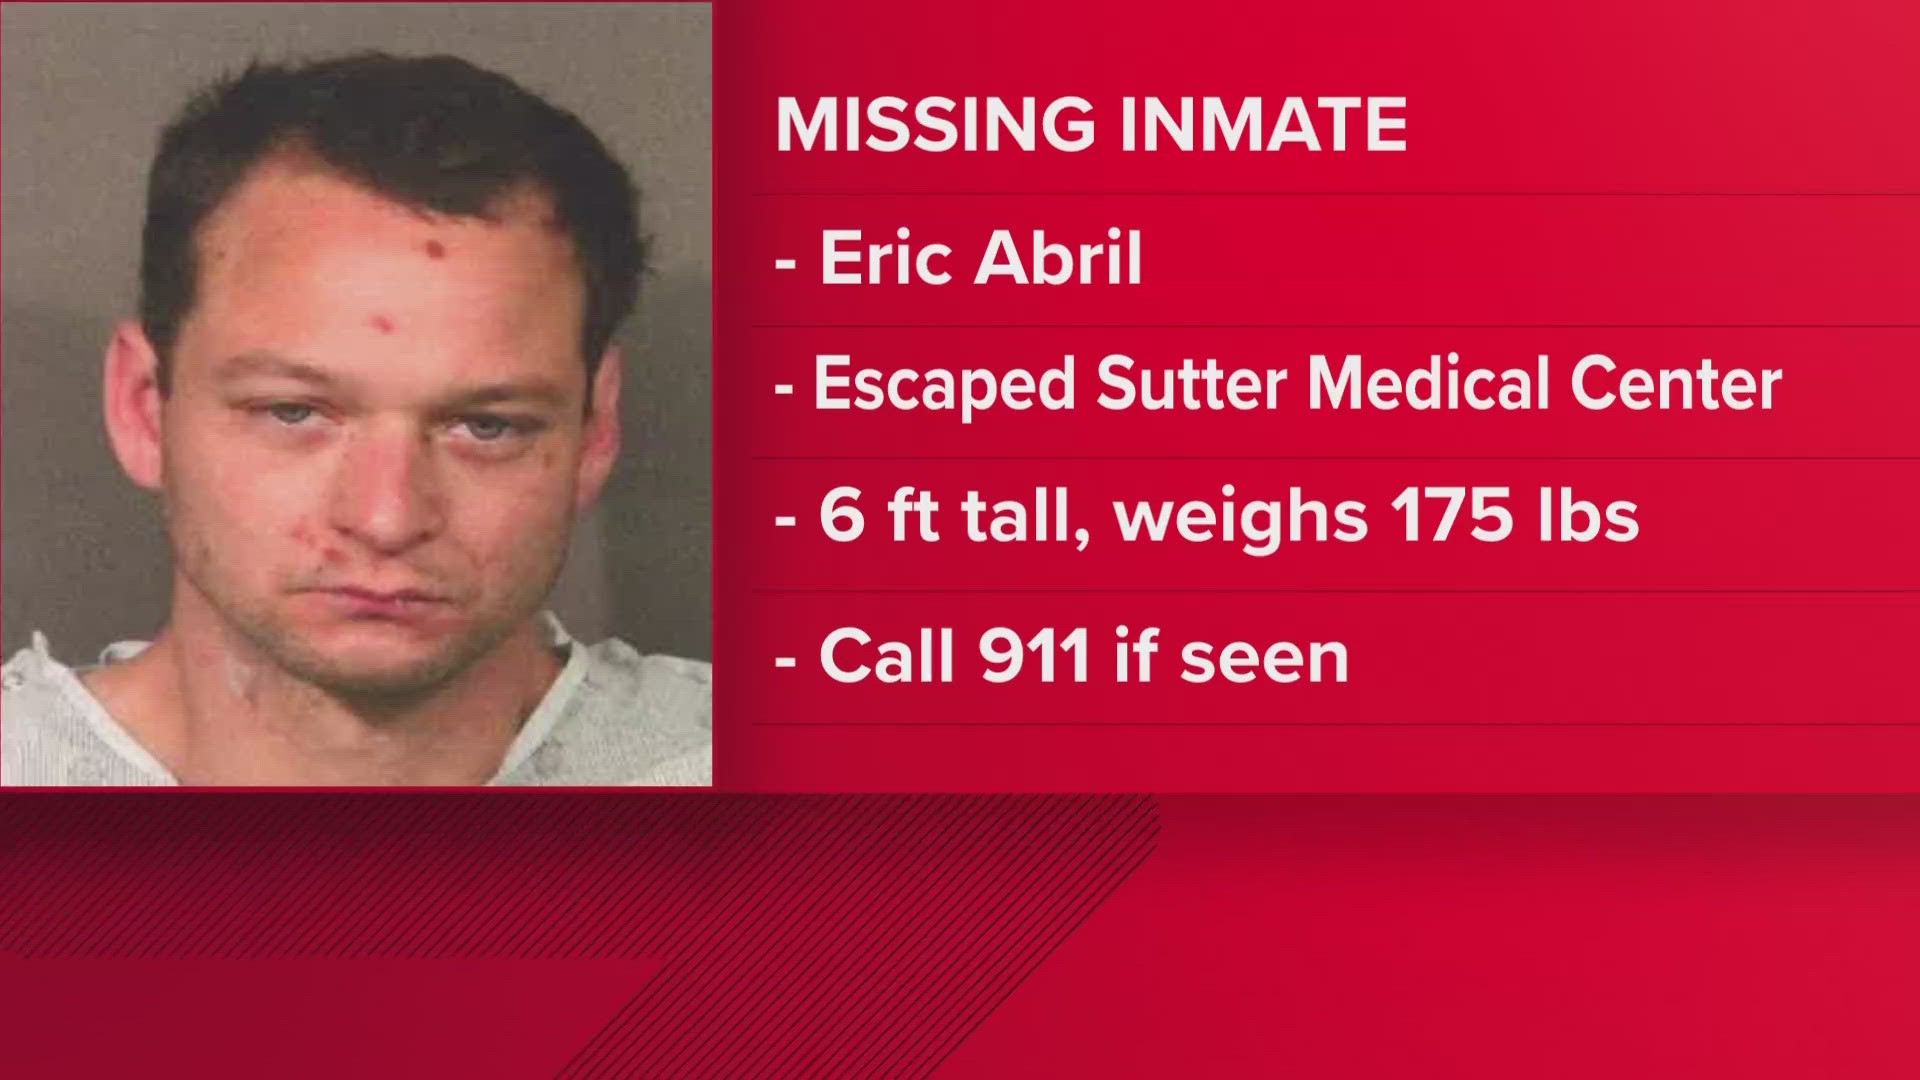 Fugitive caught 3 days after escape from hospital